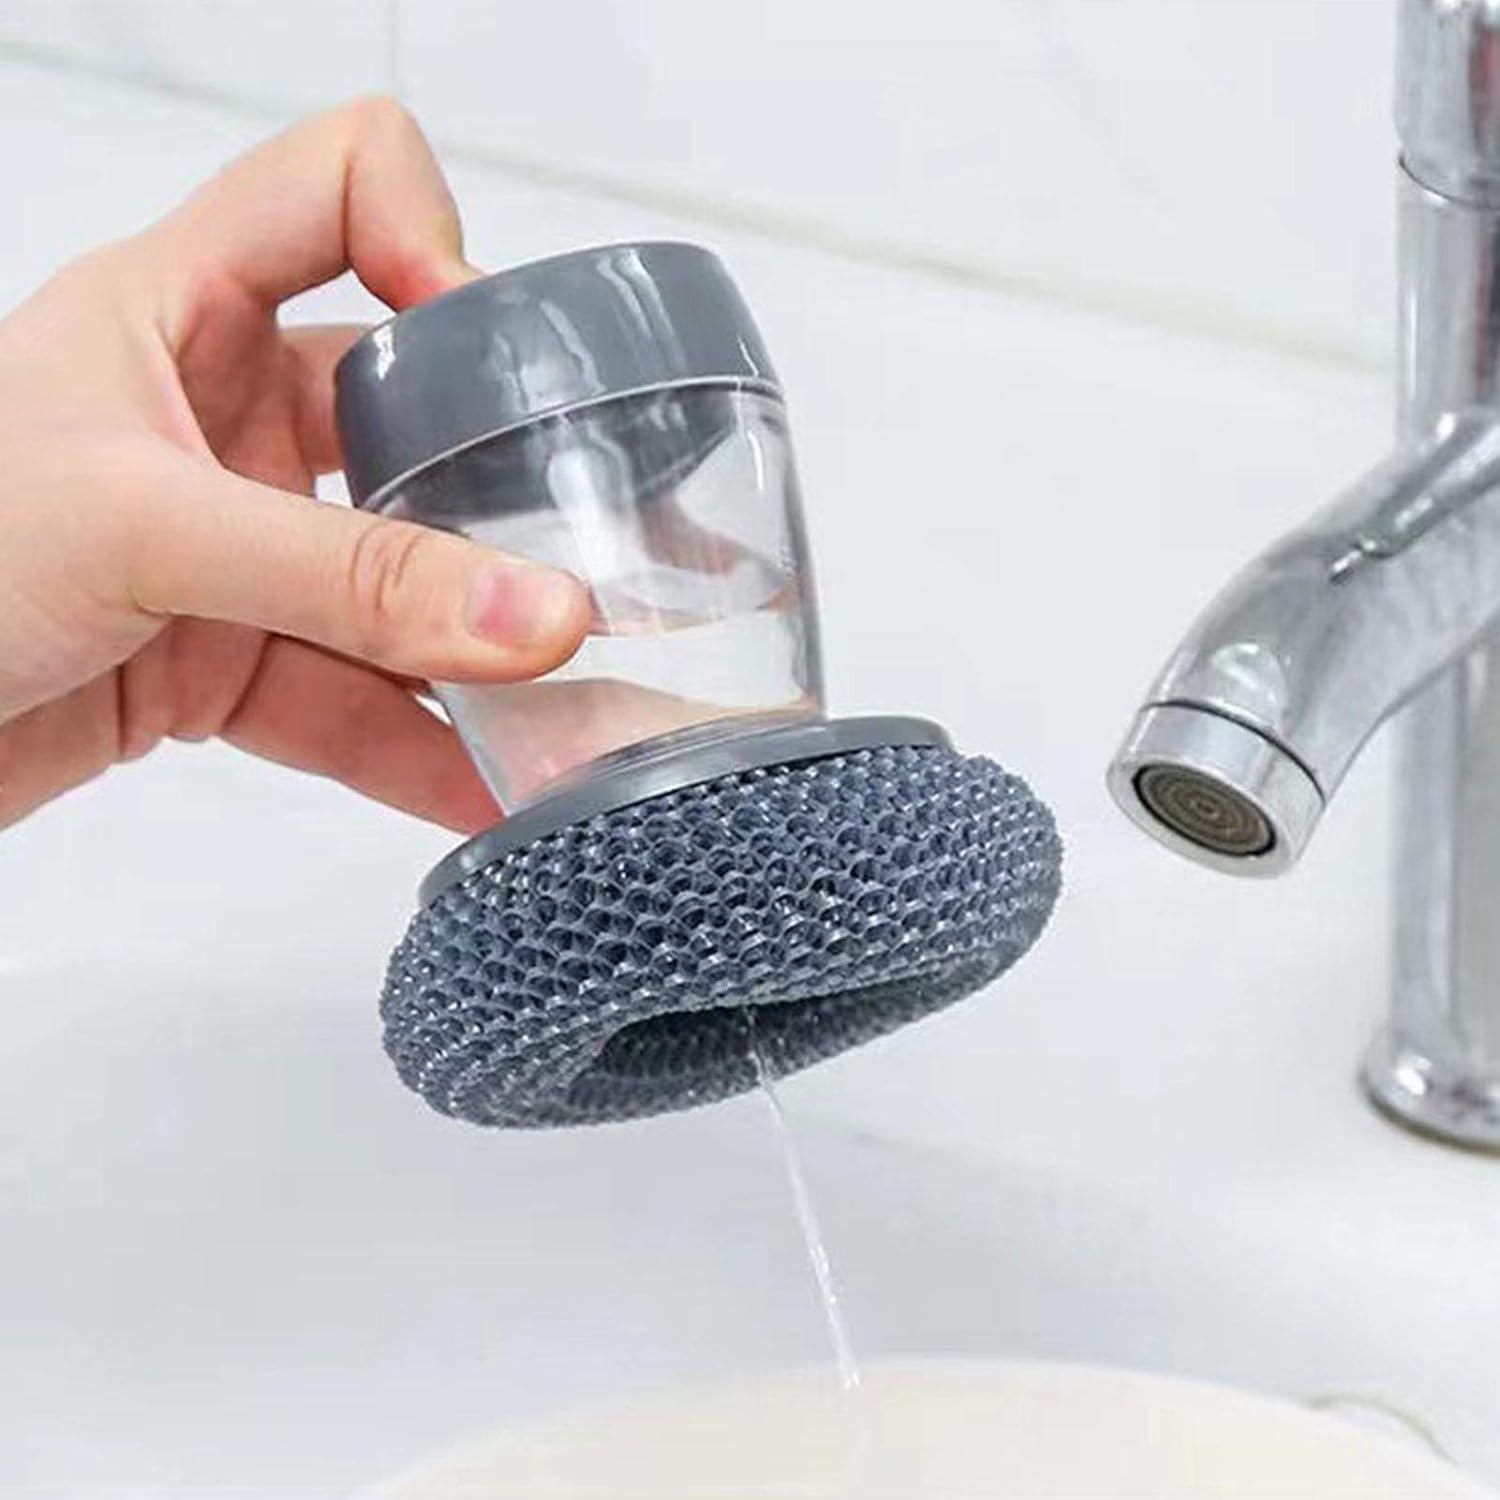 Multifunctional Pressing Cleaning Brush - 1pc